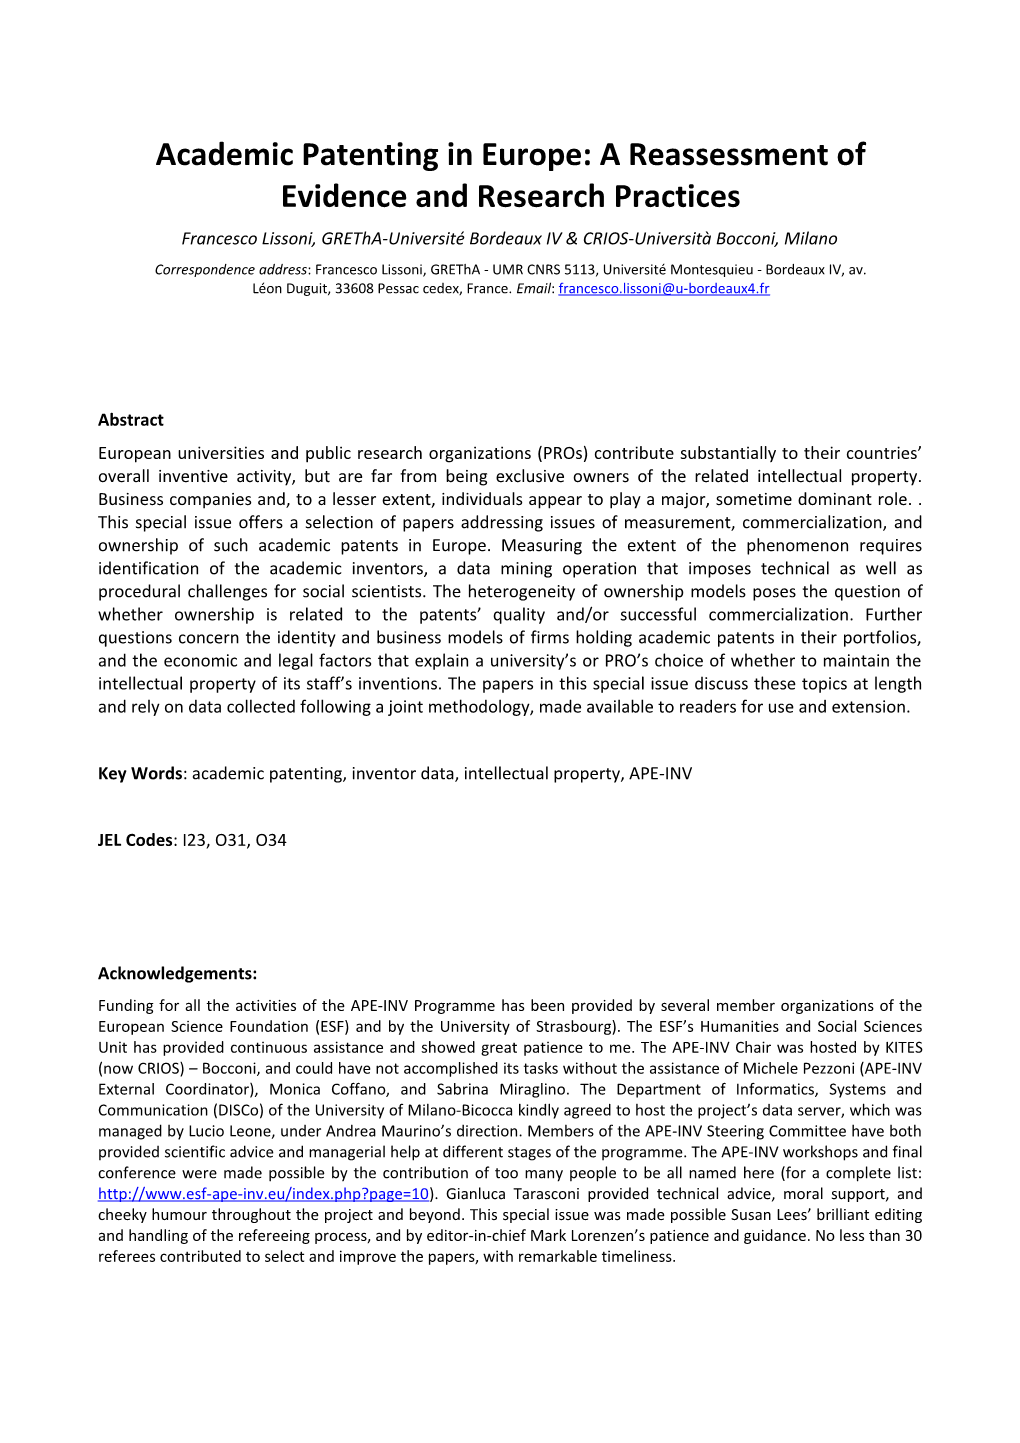 Academic Patenting in Europe: a Reassessment of Evidence and Research Practices